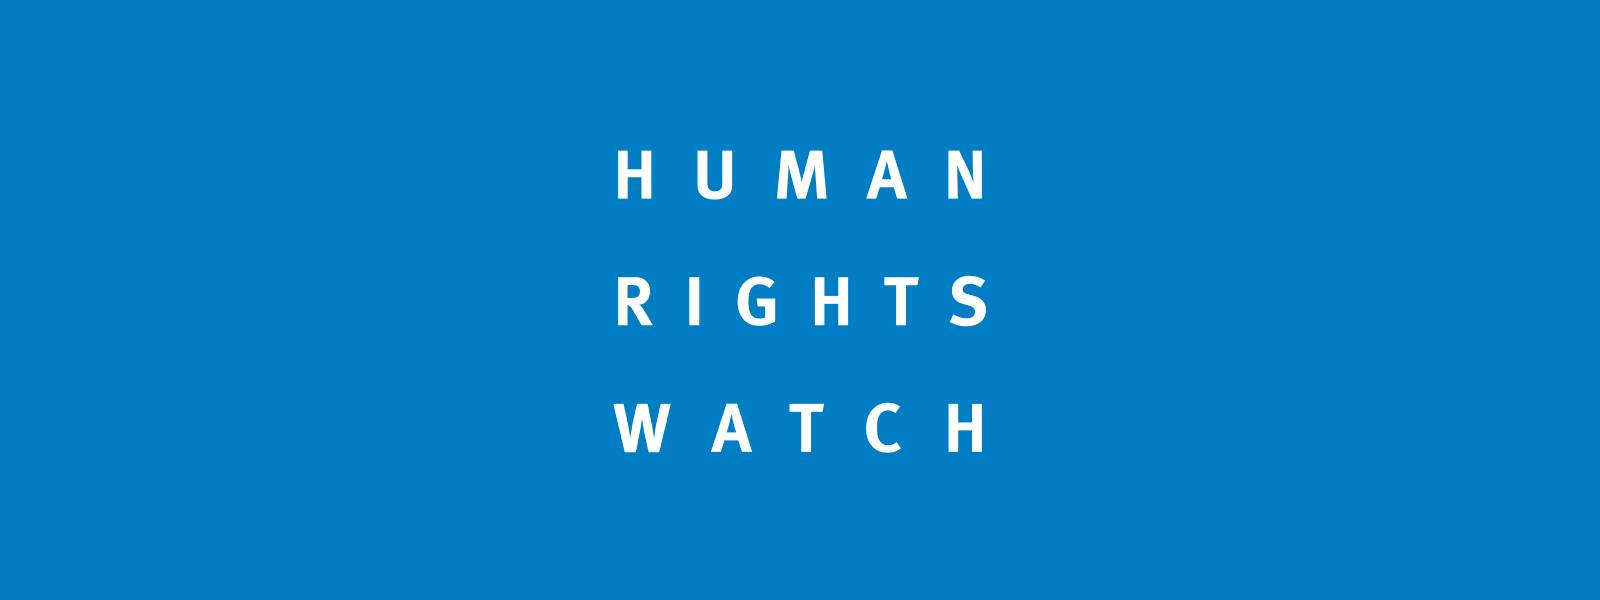 HRW urges President to cease unlawful use of force against protestors